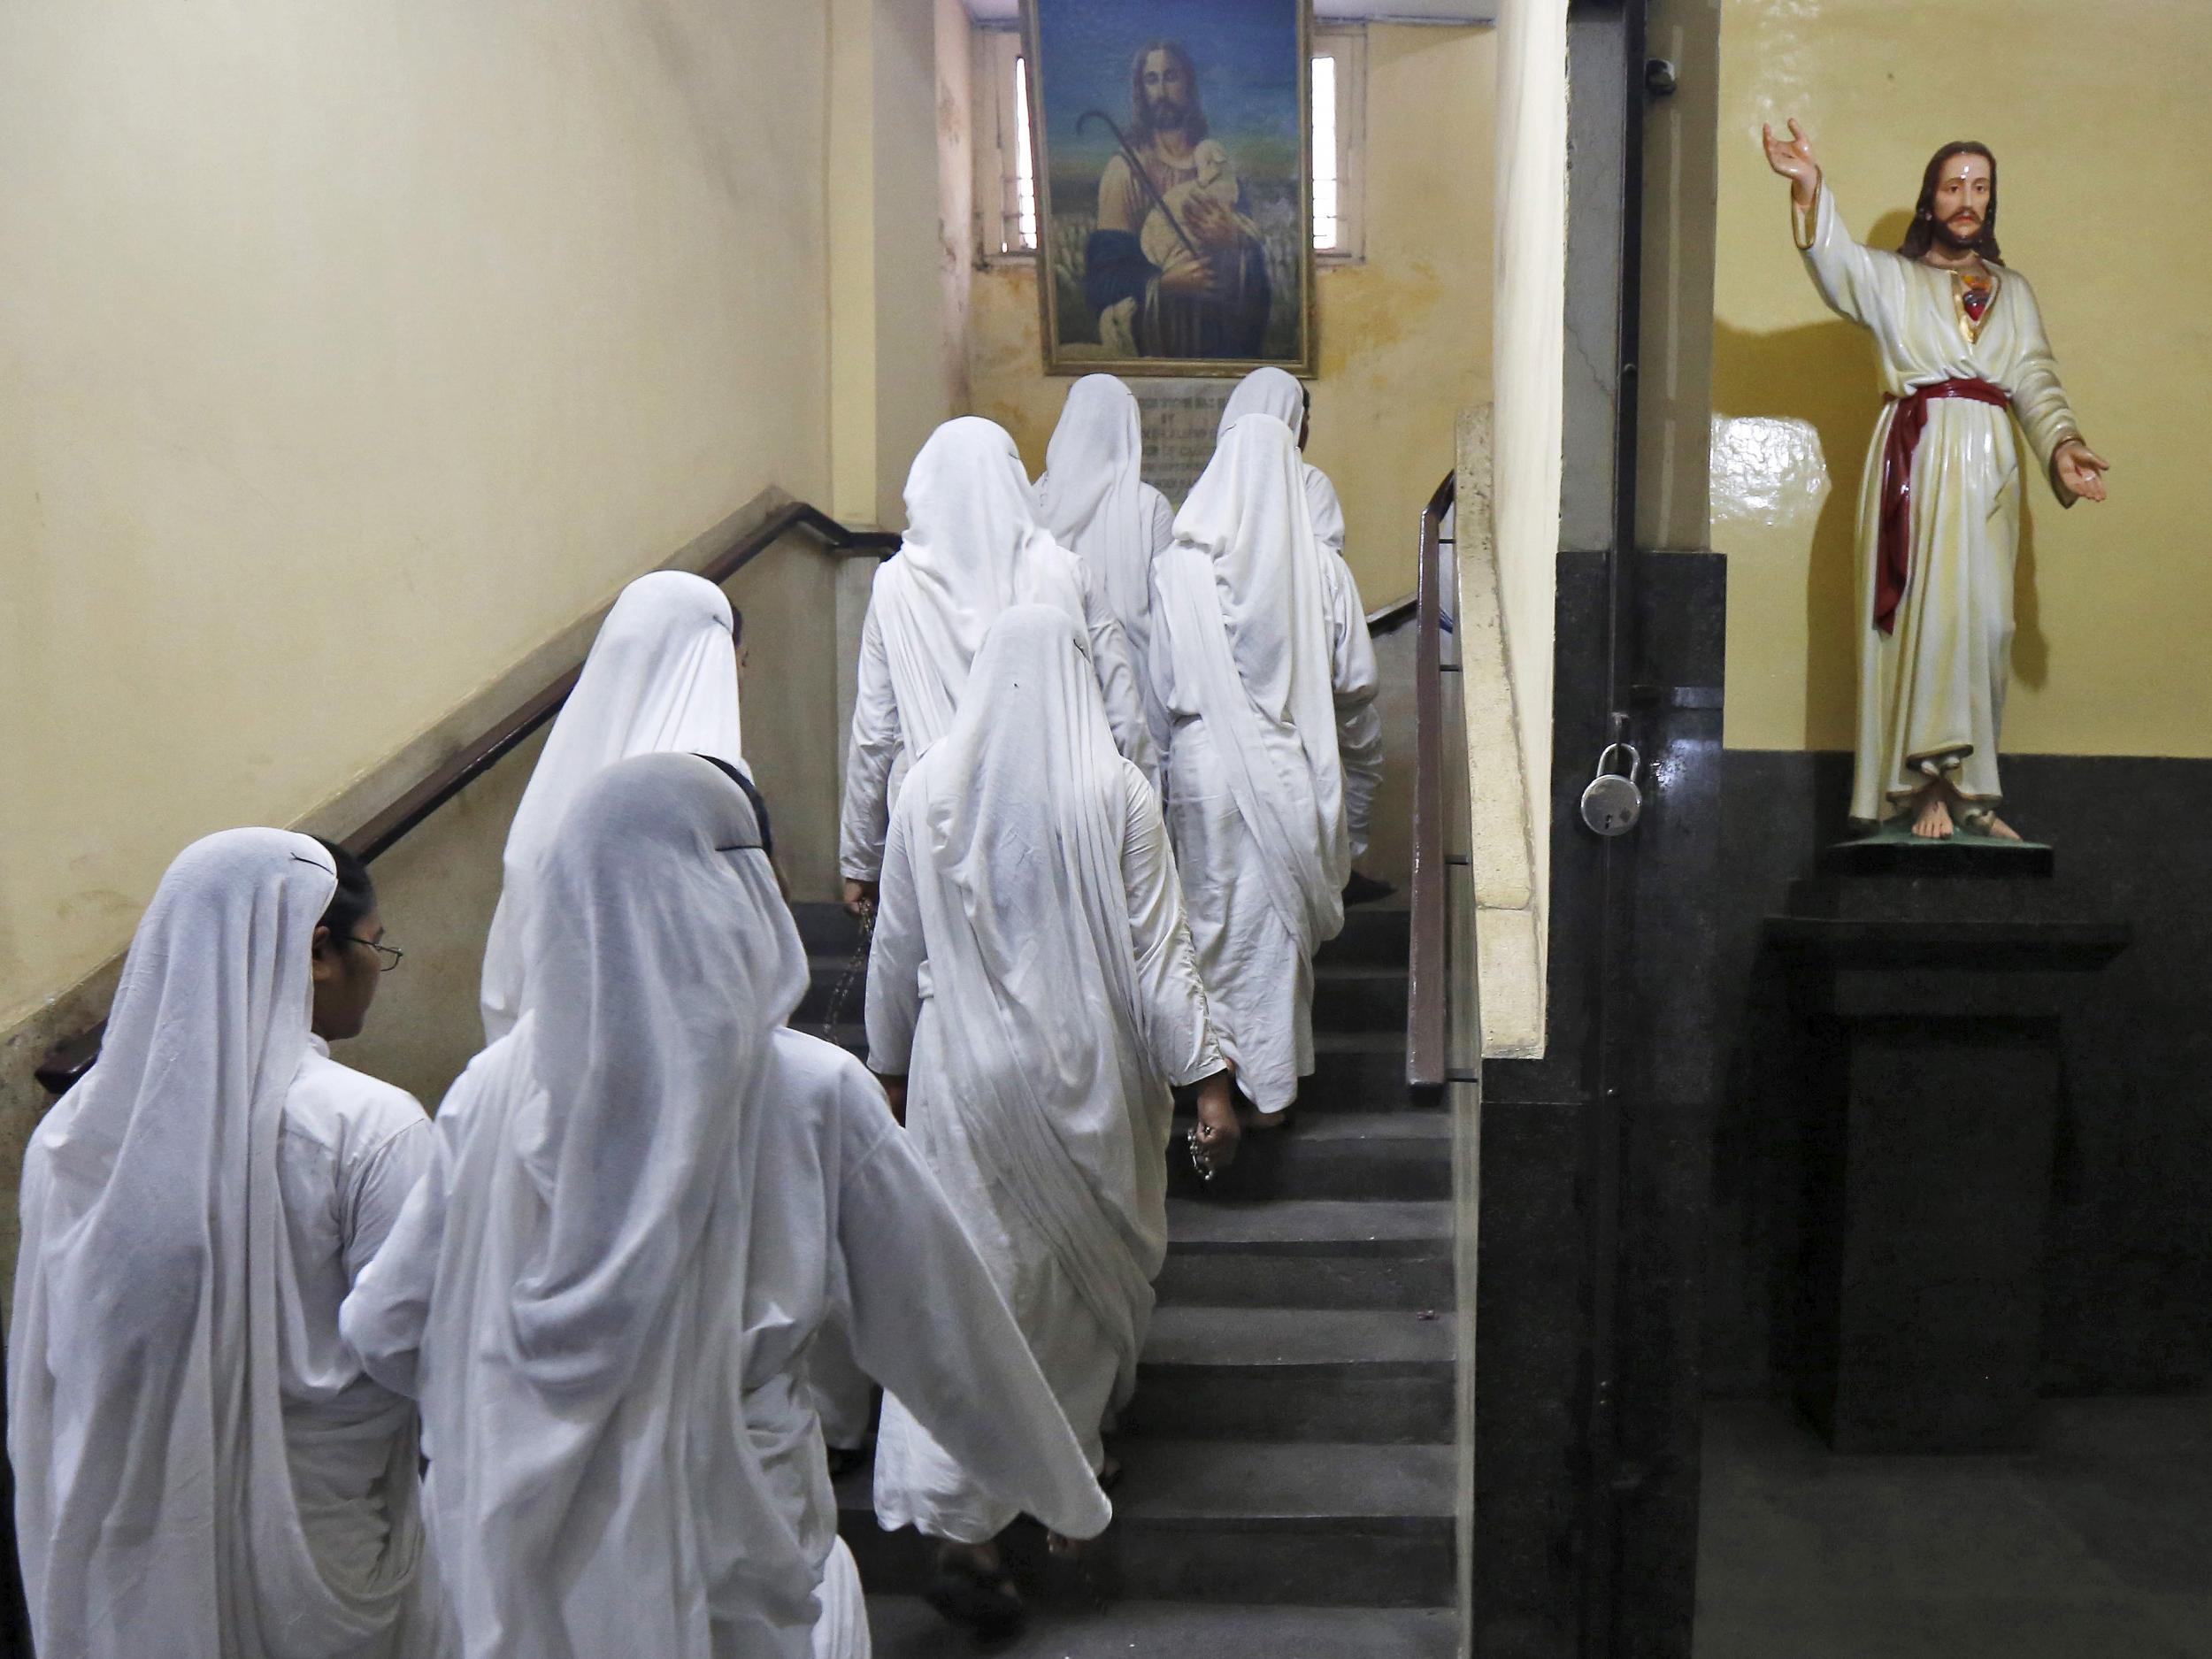 Catholic nuns attend services in India